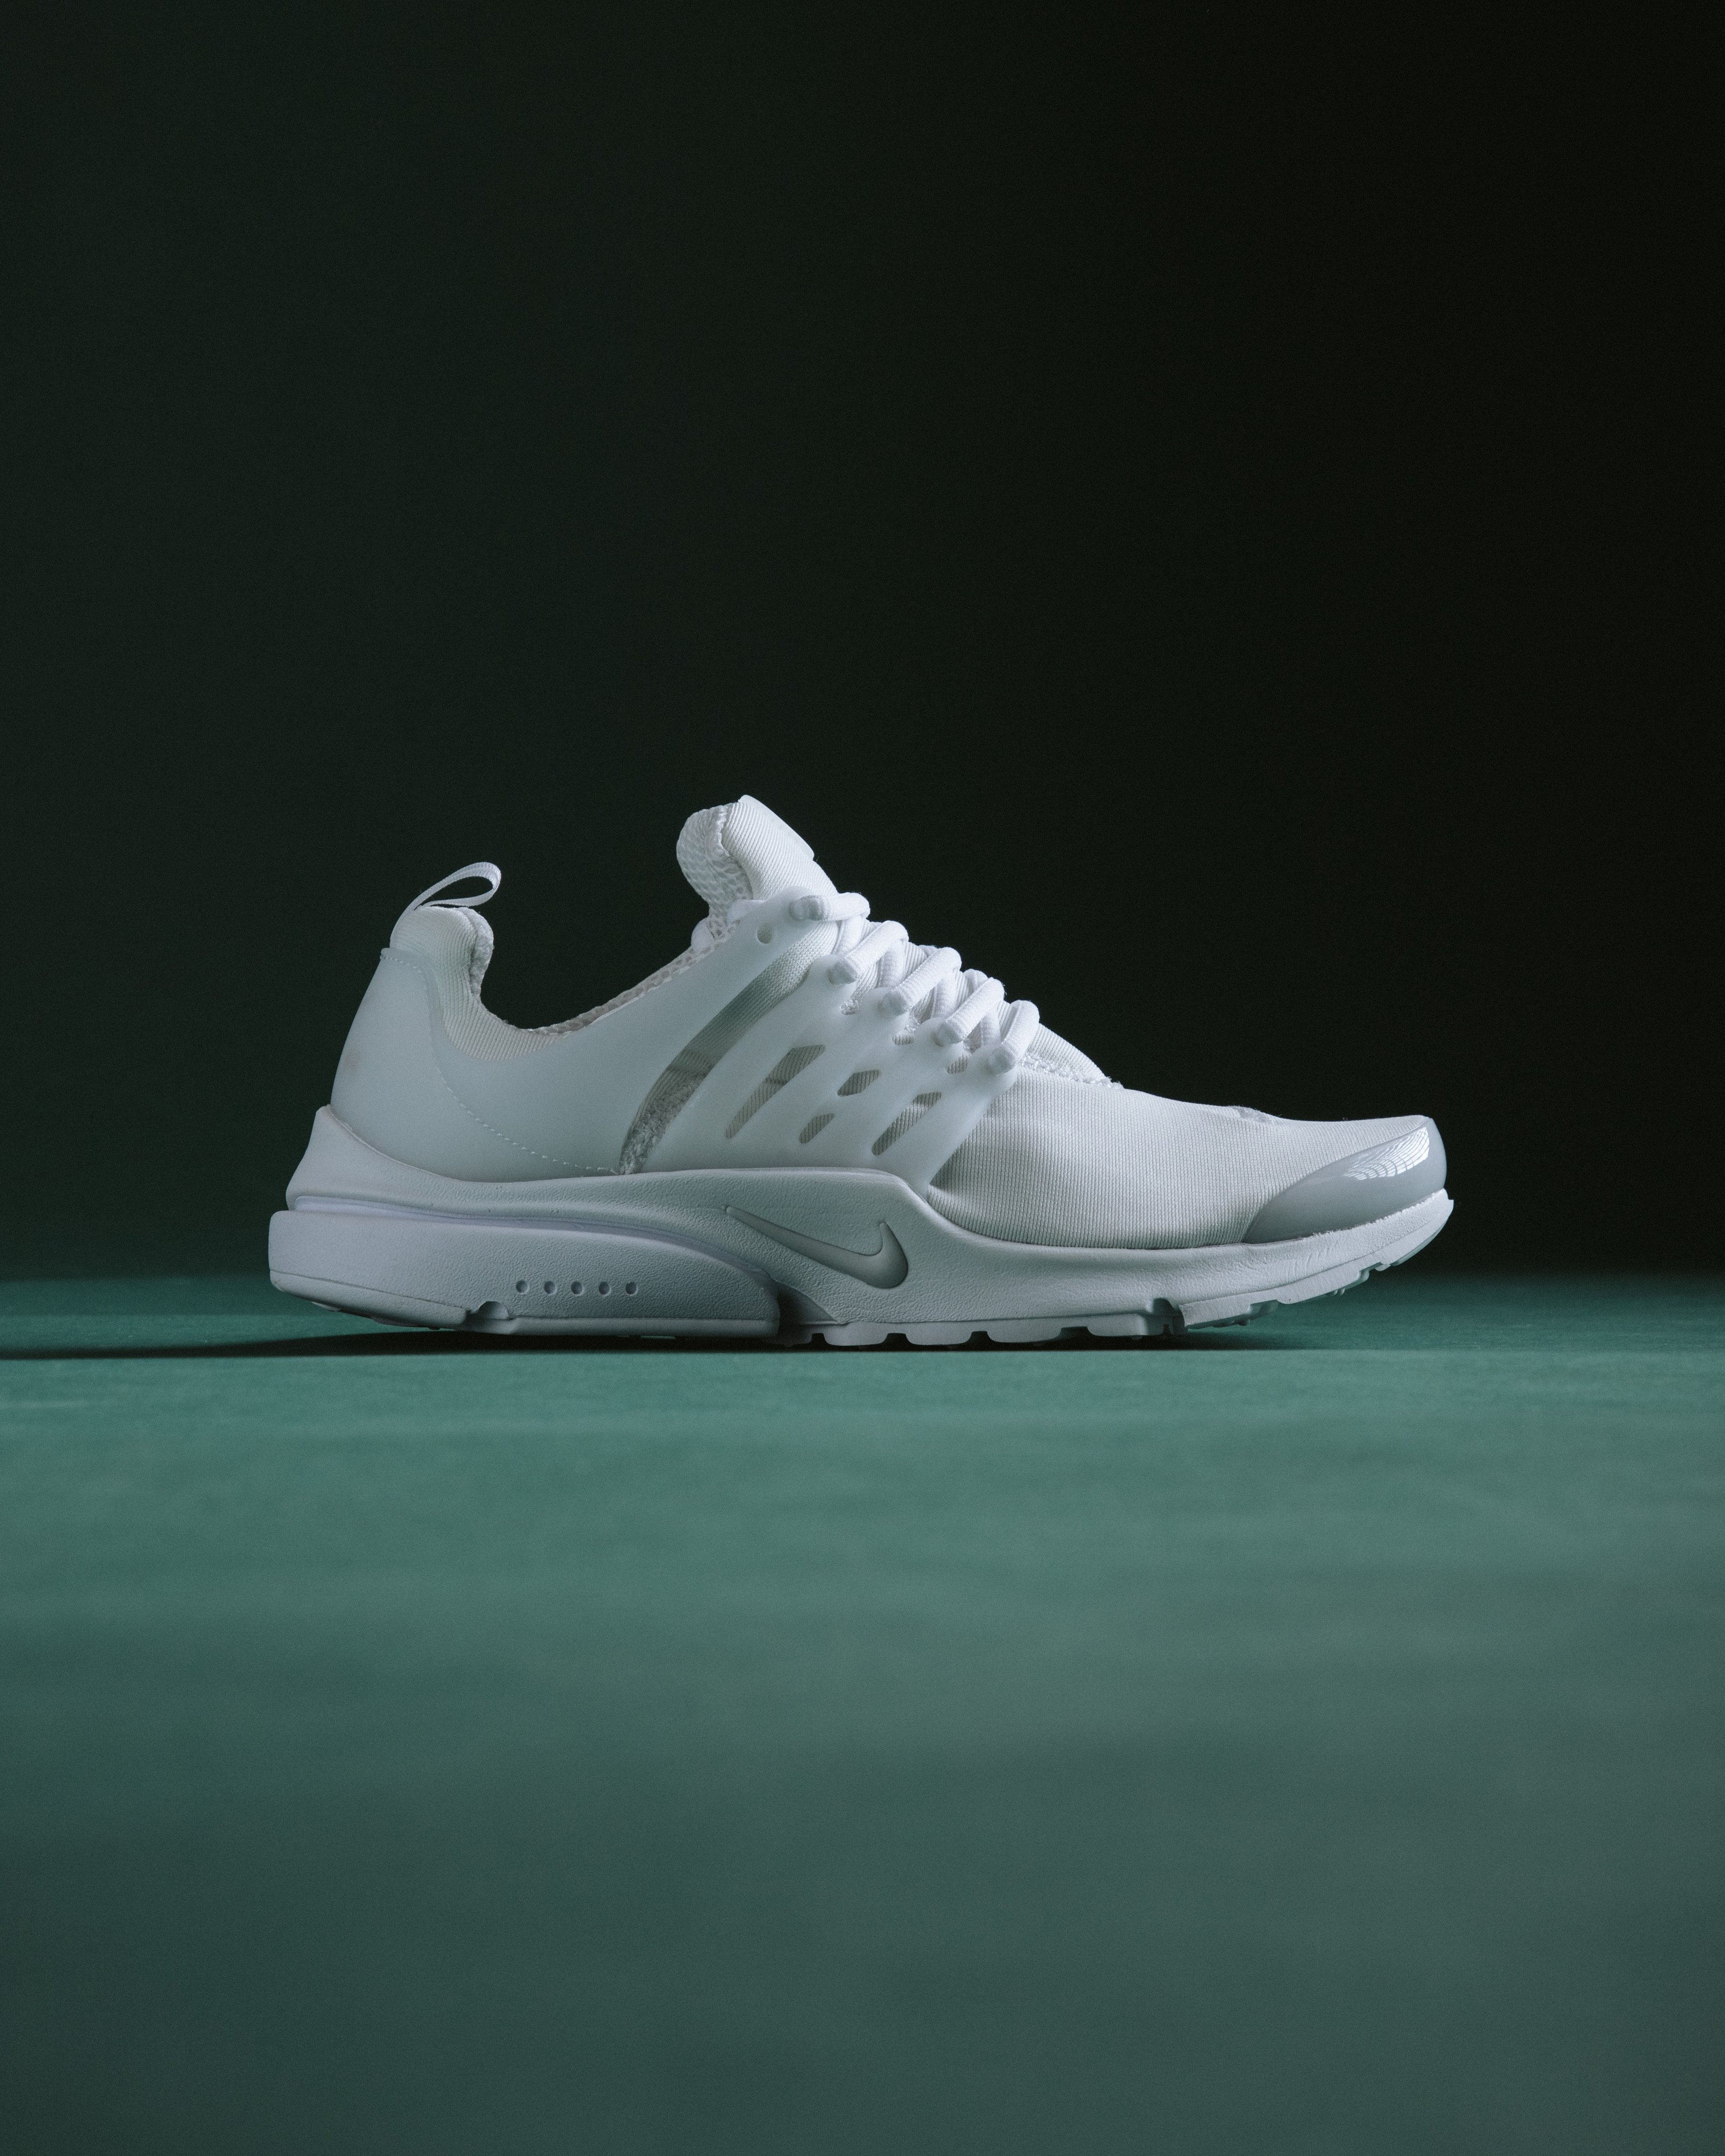 JD Sports Canada on Twitter: "Evolved from the original design to embrace motion construction ✔️ Shop the Nike Air Presto 'Pure Platnium' now online and at JD Guildford &amp; JD